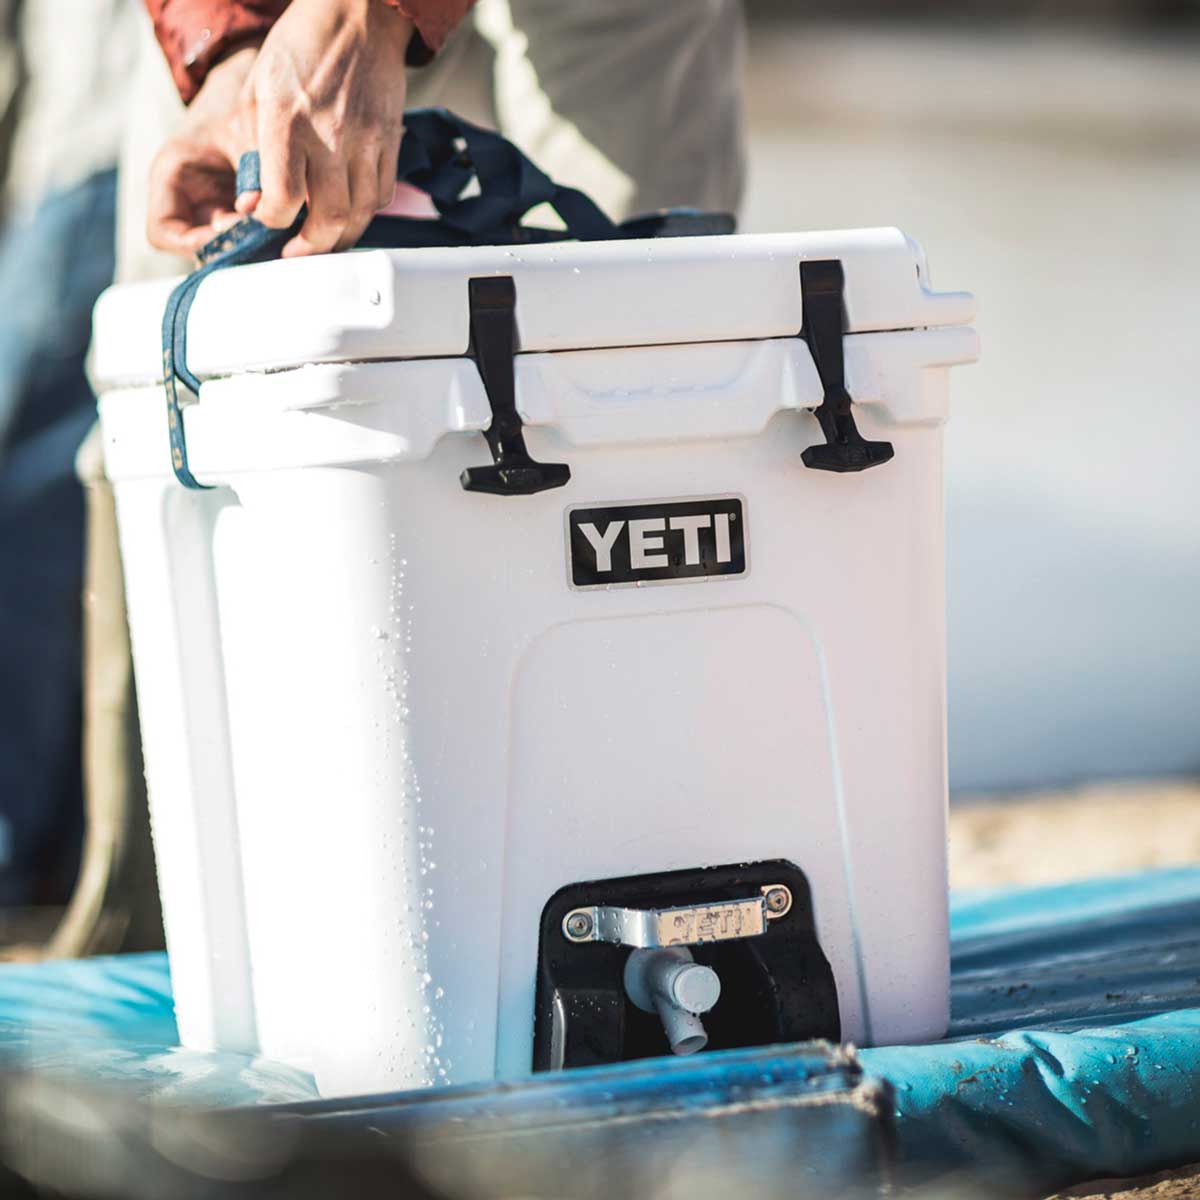 yeti silo water cooler referral code